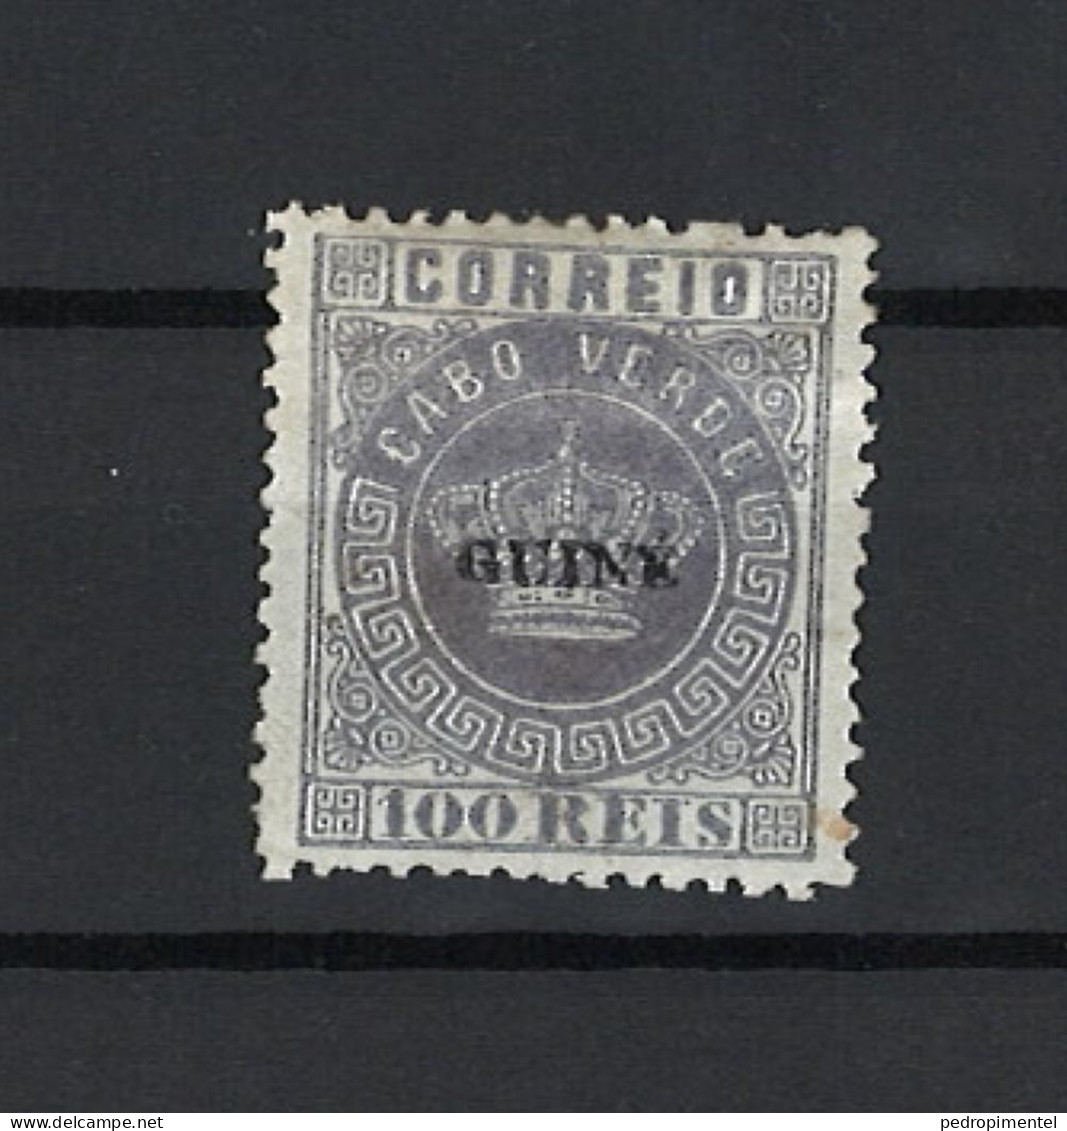 Portugal Guinee 1879-82 First Issue (Crown With Small GUINE Surcharge) 100 Reis Condition MH NGAI Mundifil Guinee #7 - Portuguese Guinea